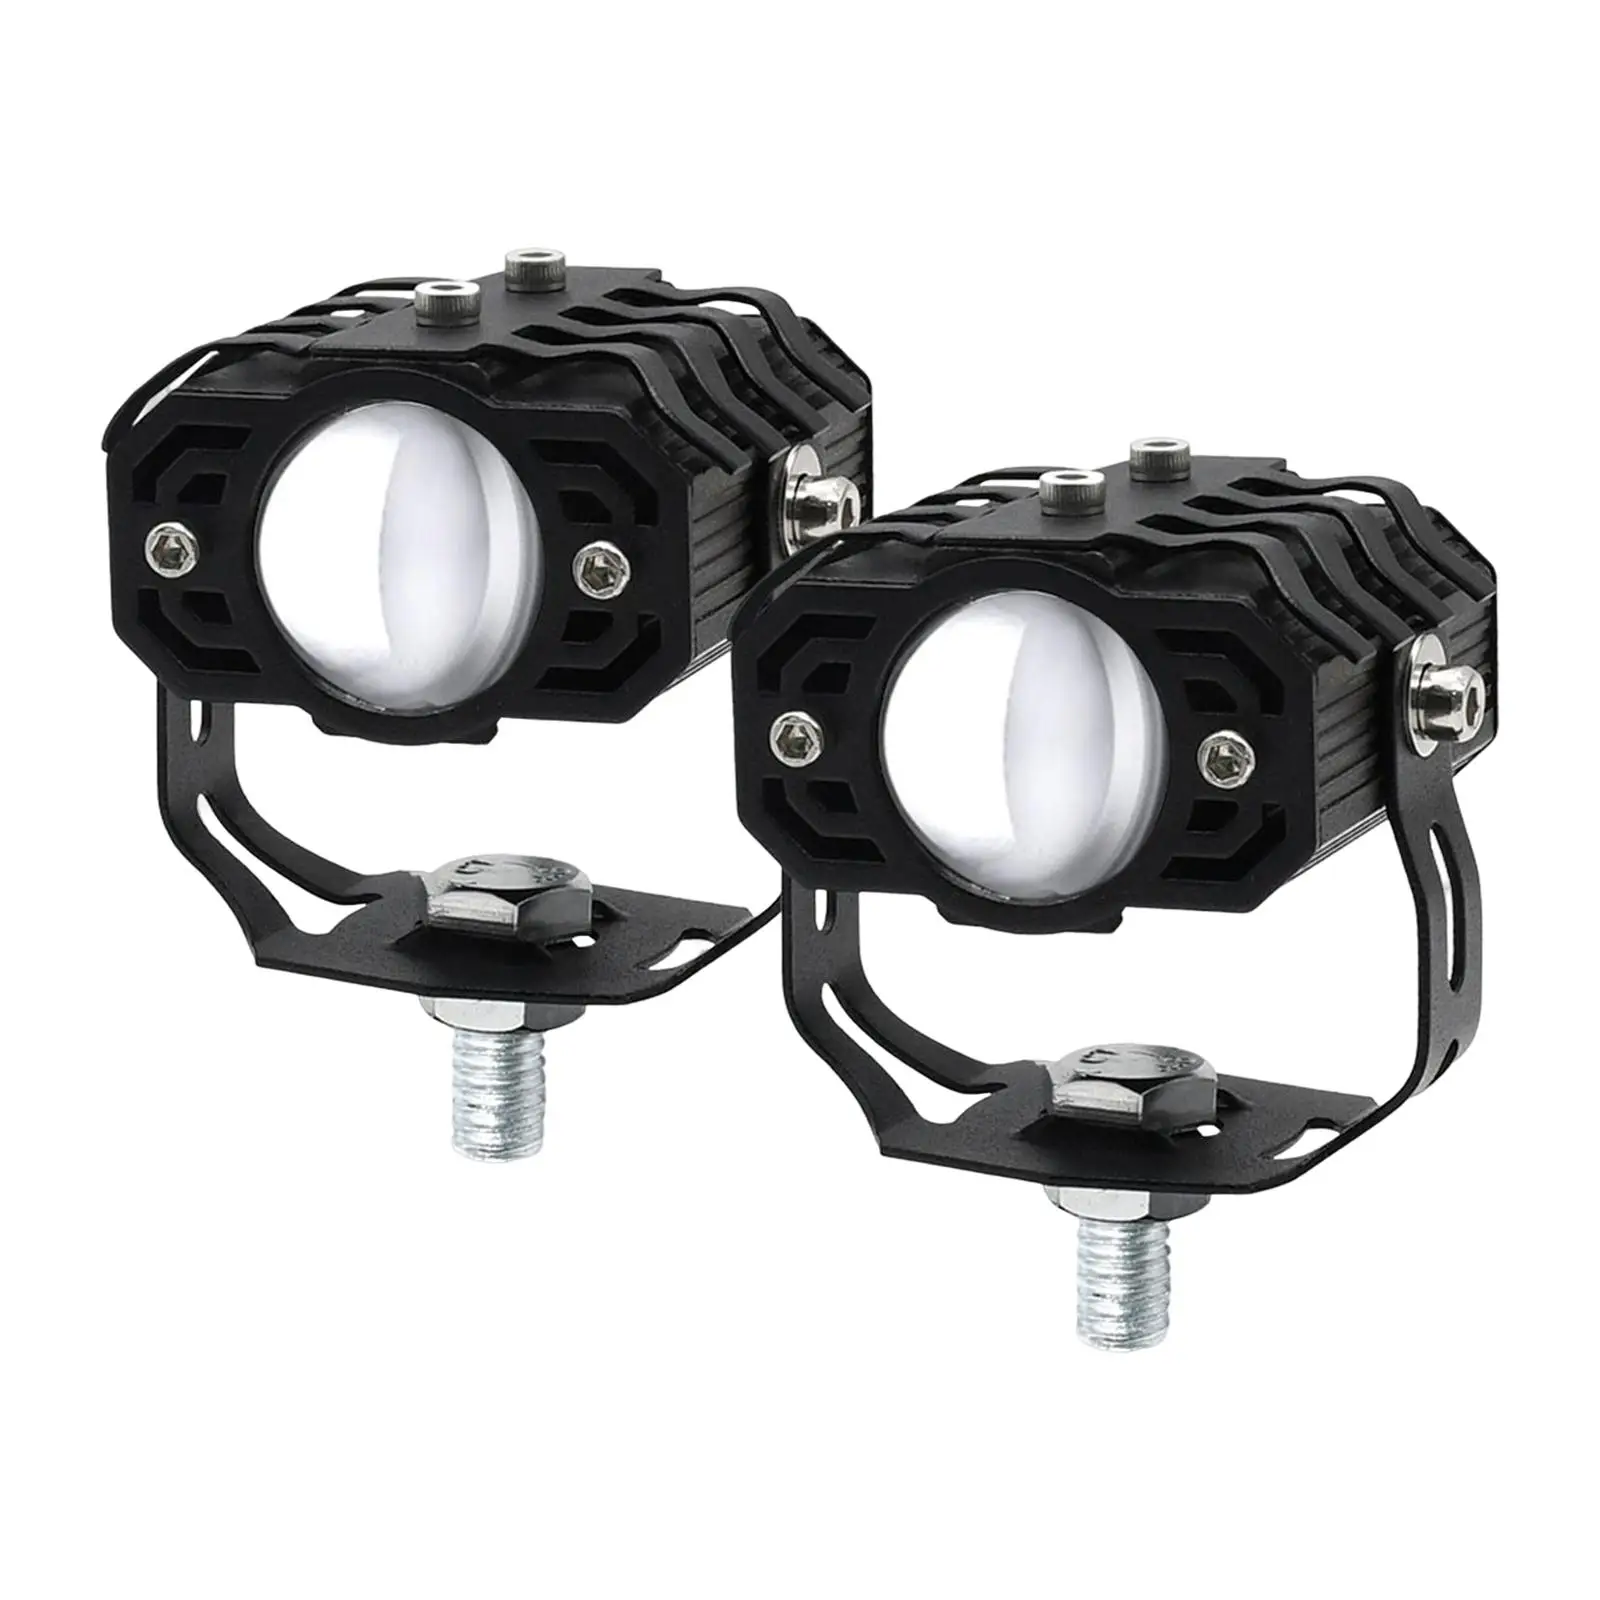 2x Motorcycle Auxiliary Driving Lights Spotlight Front Assembly for SUV